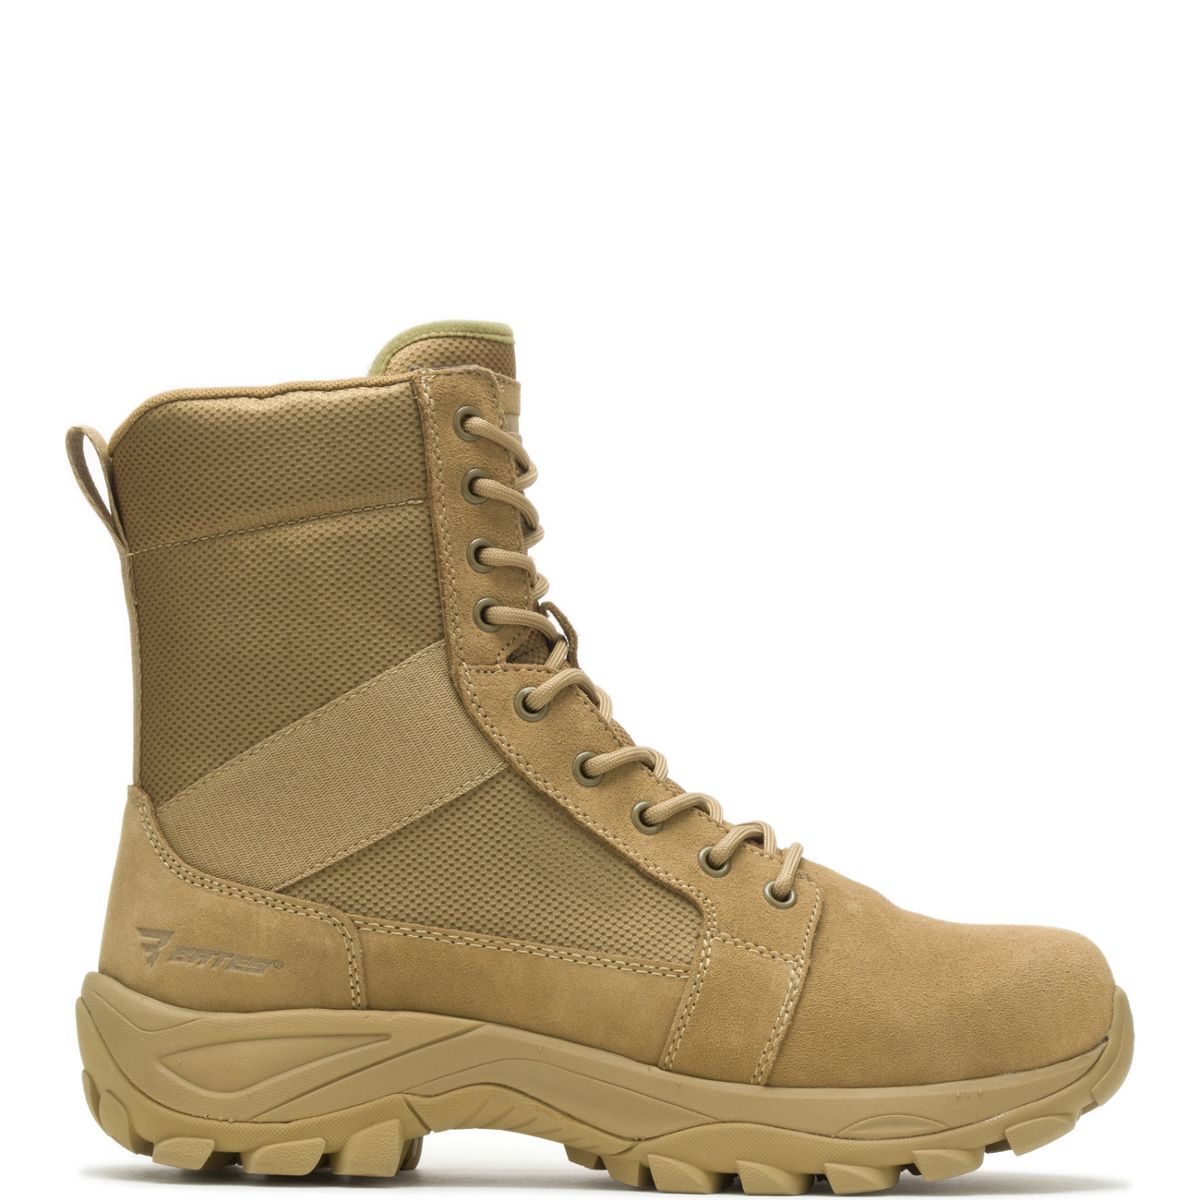 Under armour 8.5 US Tactical Boots Footwear for sale